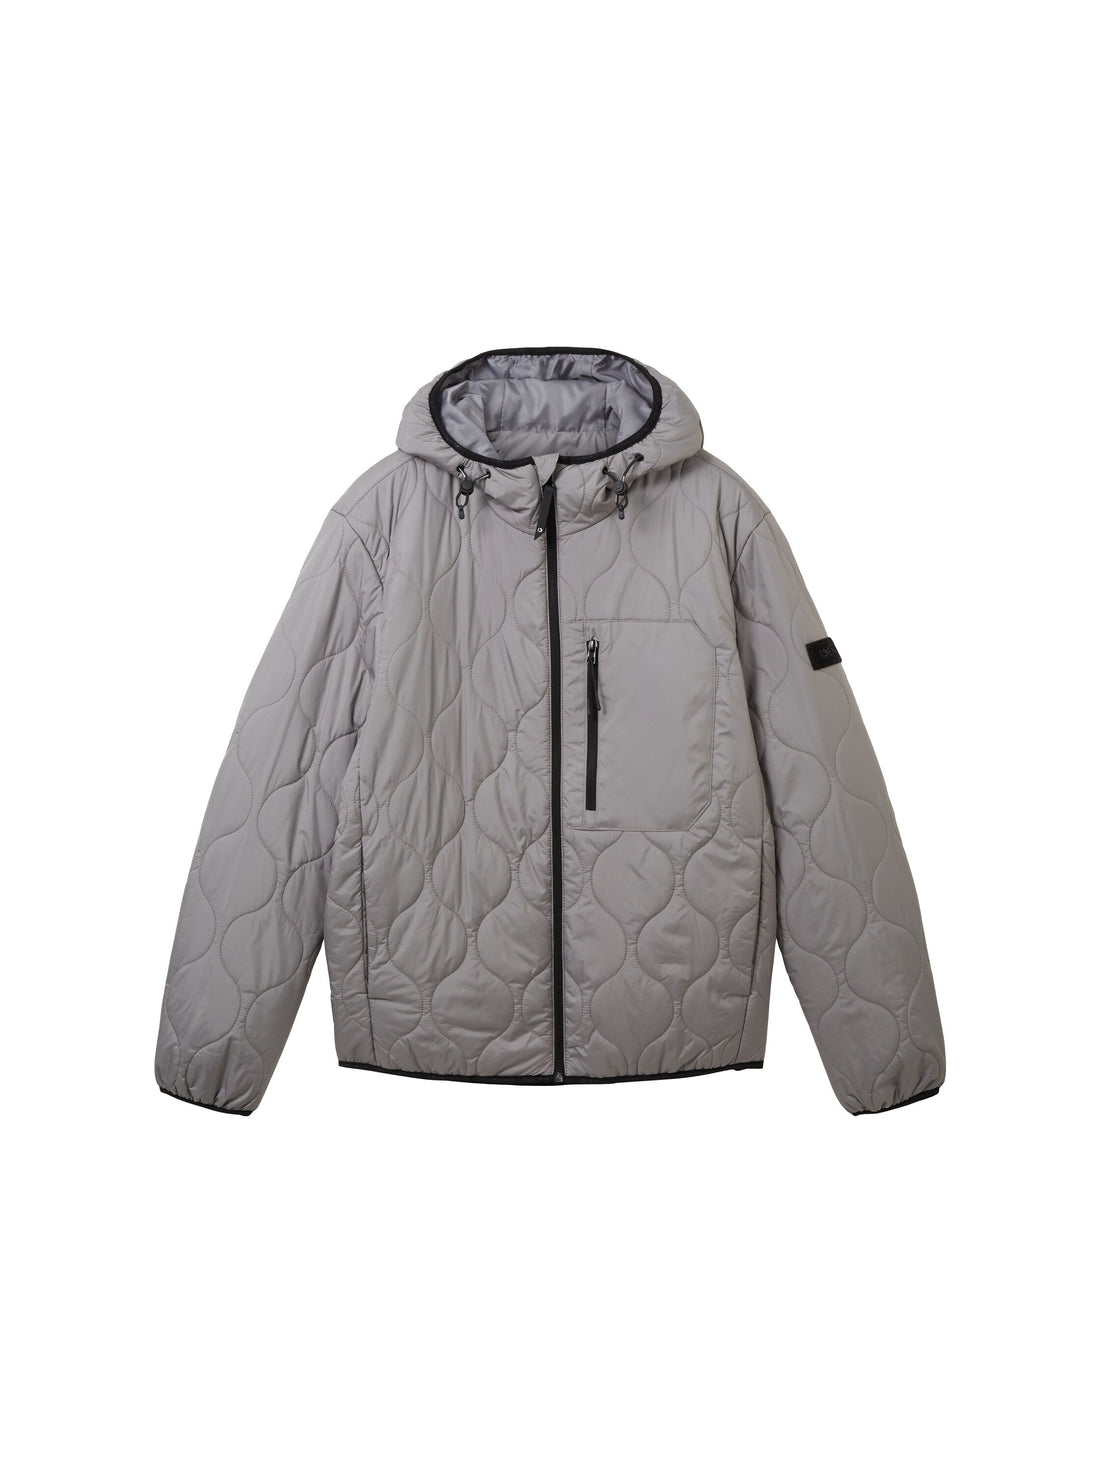 Quilted Puffer Light Weight Jacket_1036187_30902_01